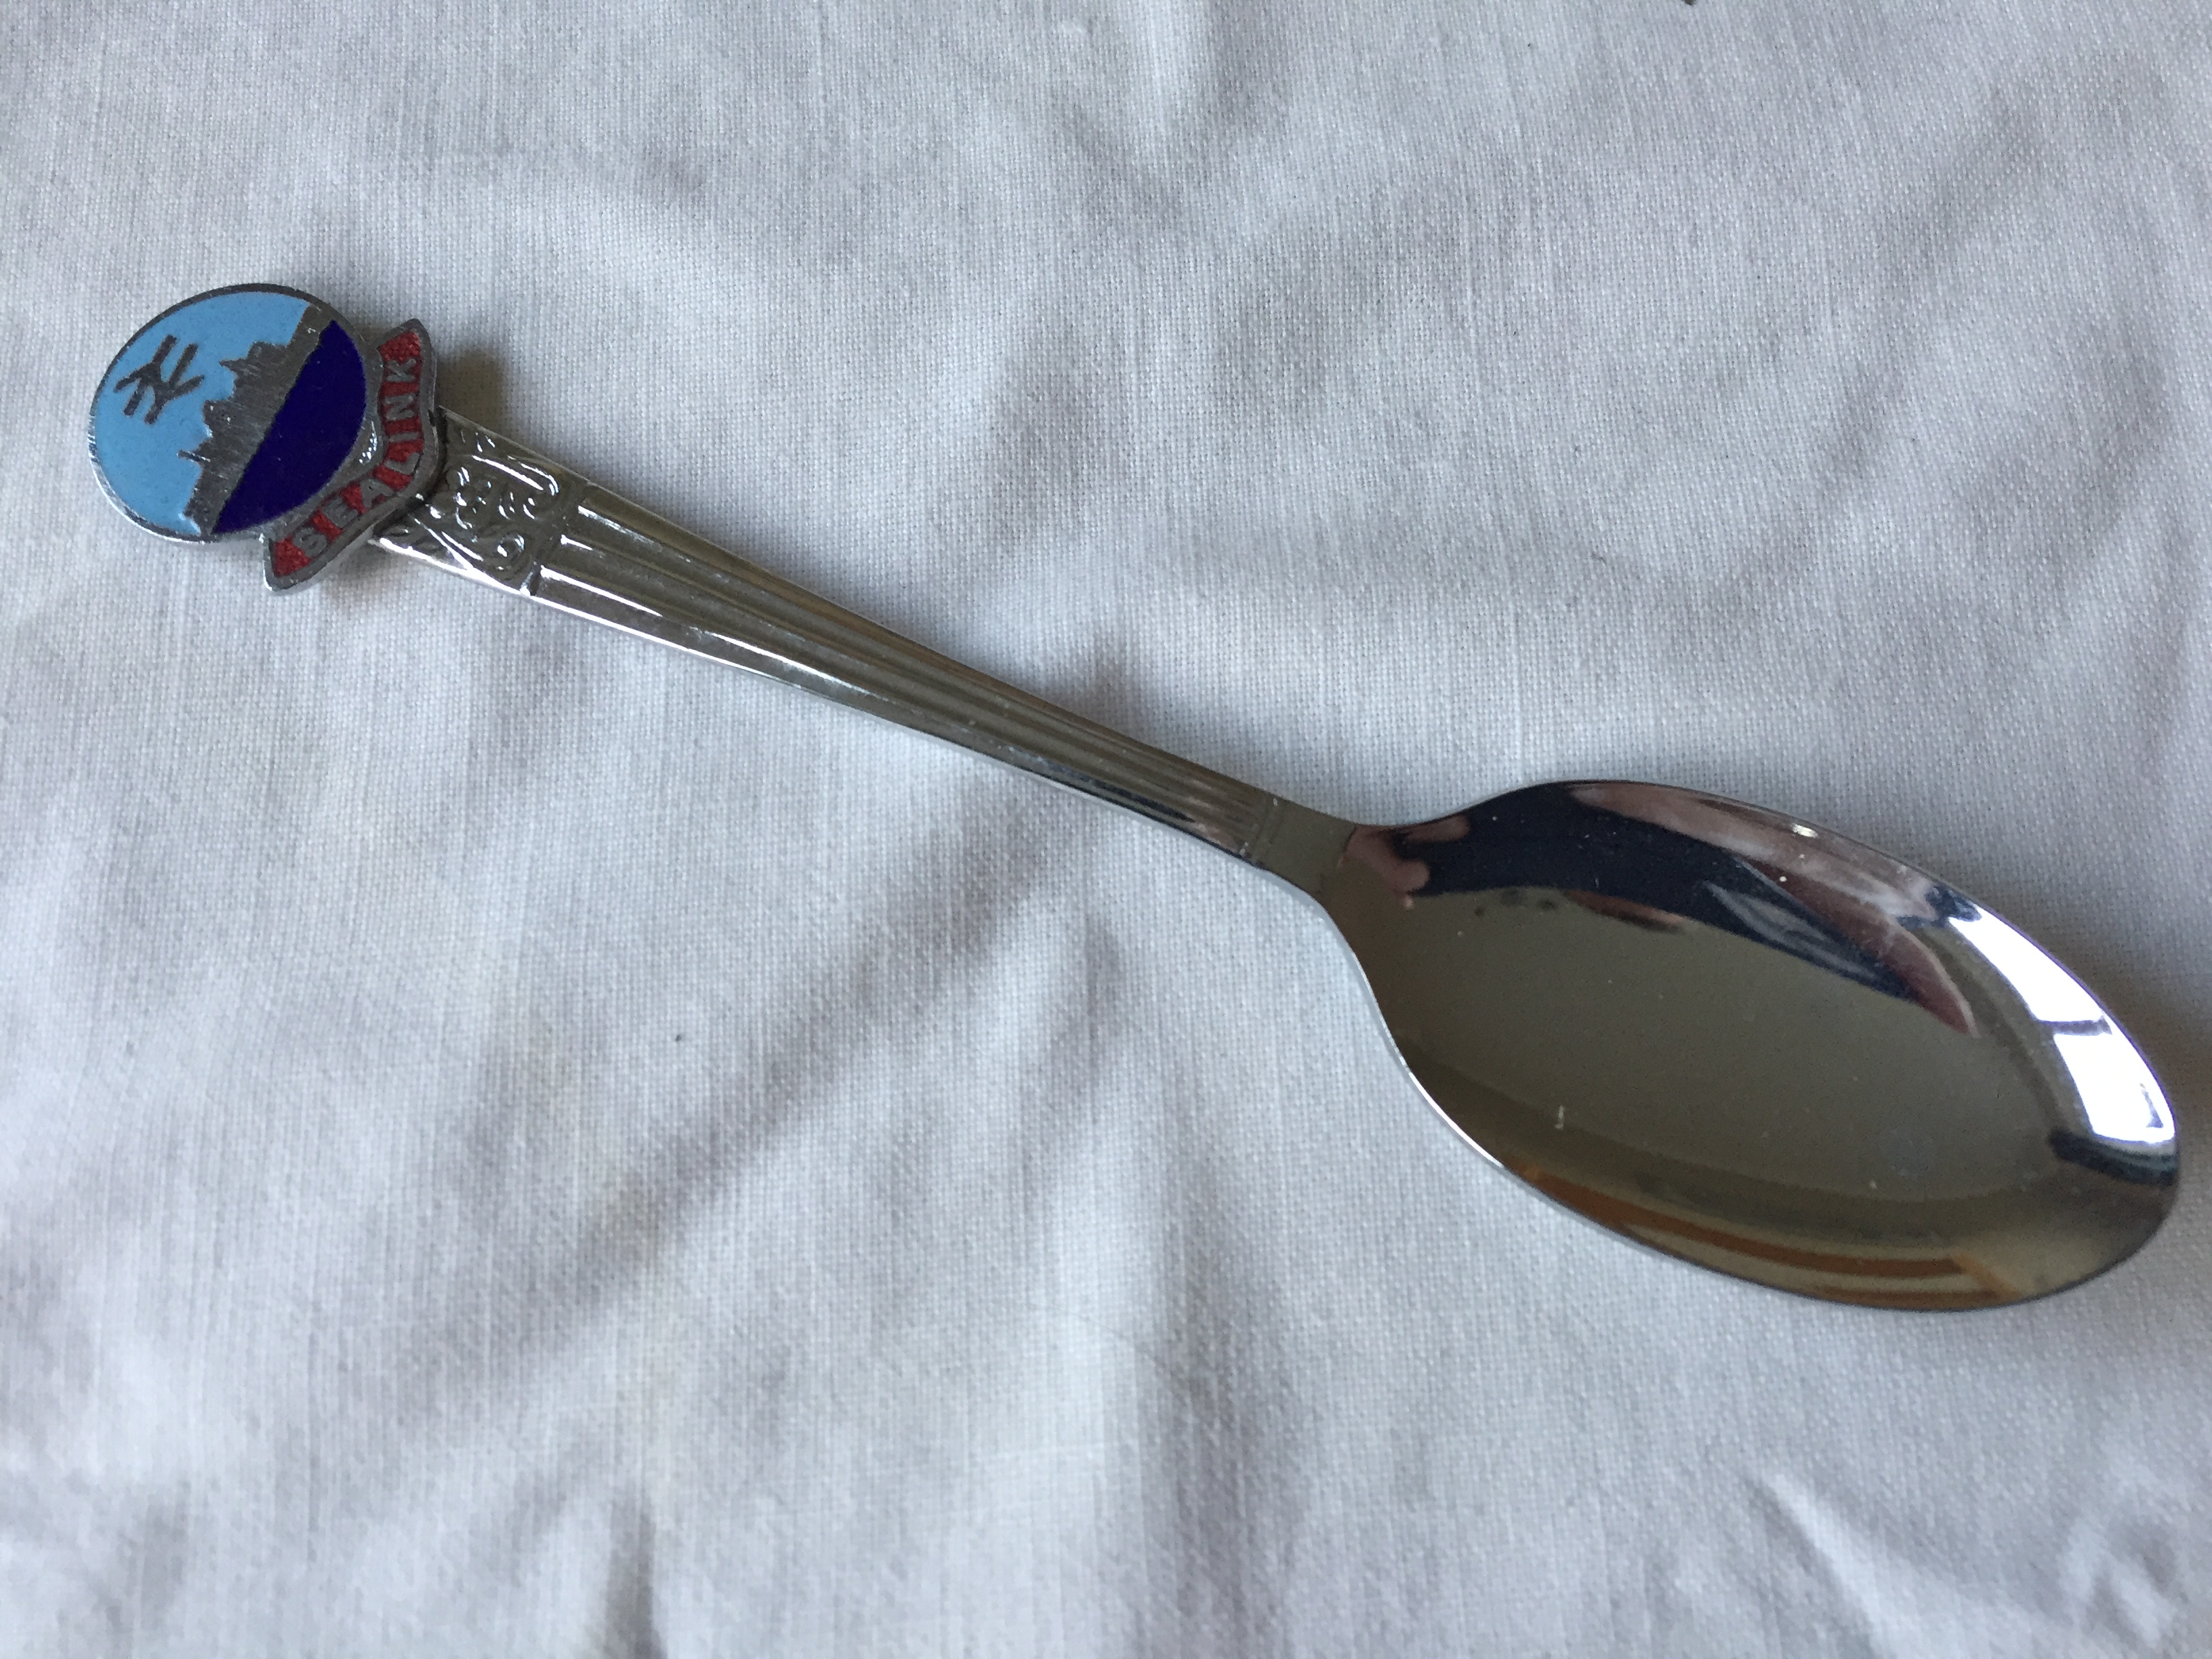 EARLY SOUVENIR SPOON FROM THE SEALINK FERRY CROSSING SERVICE